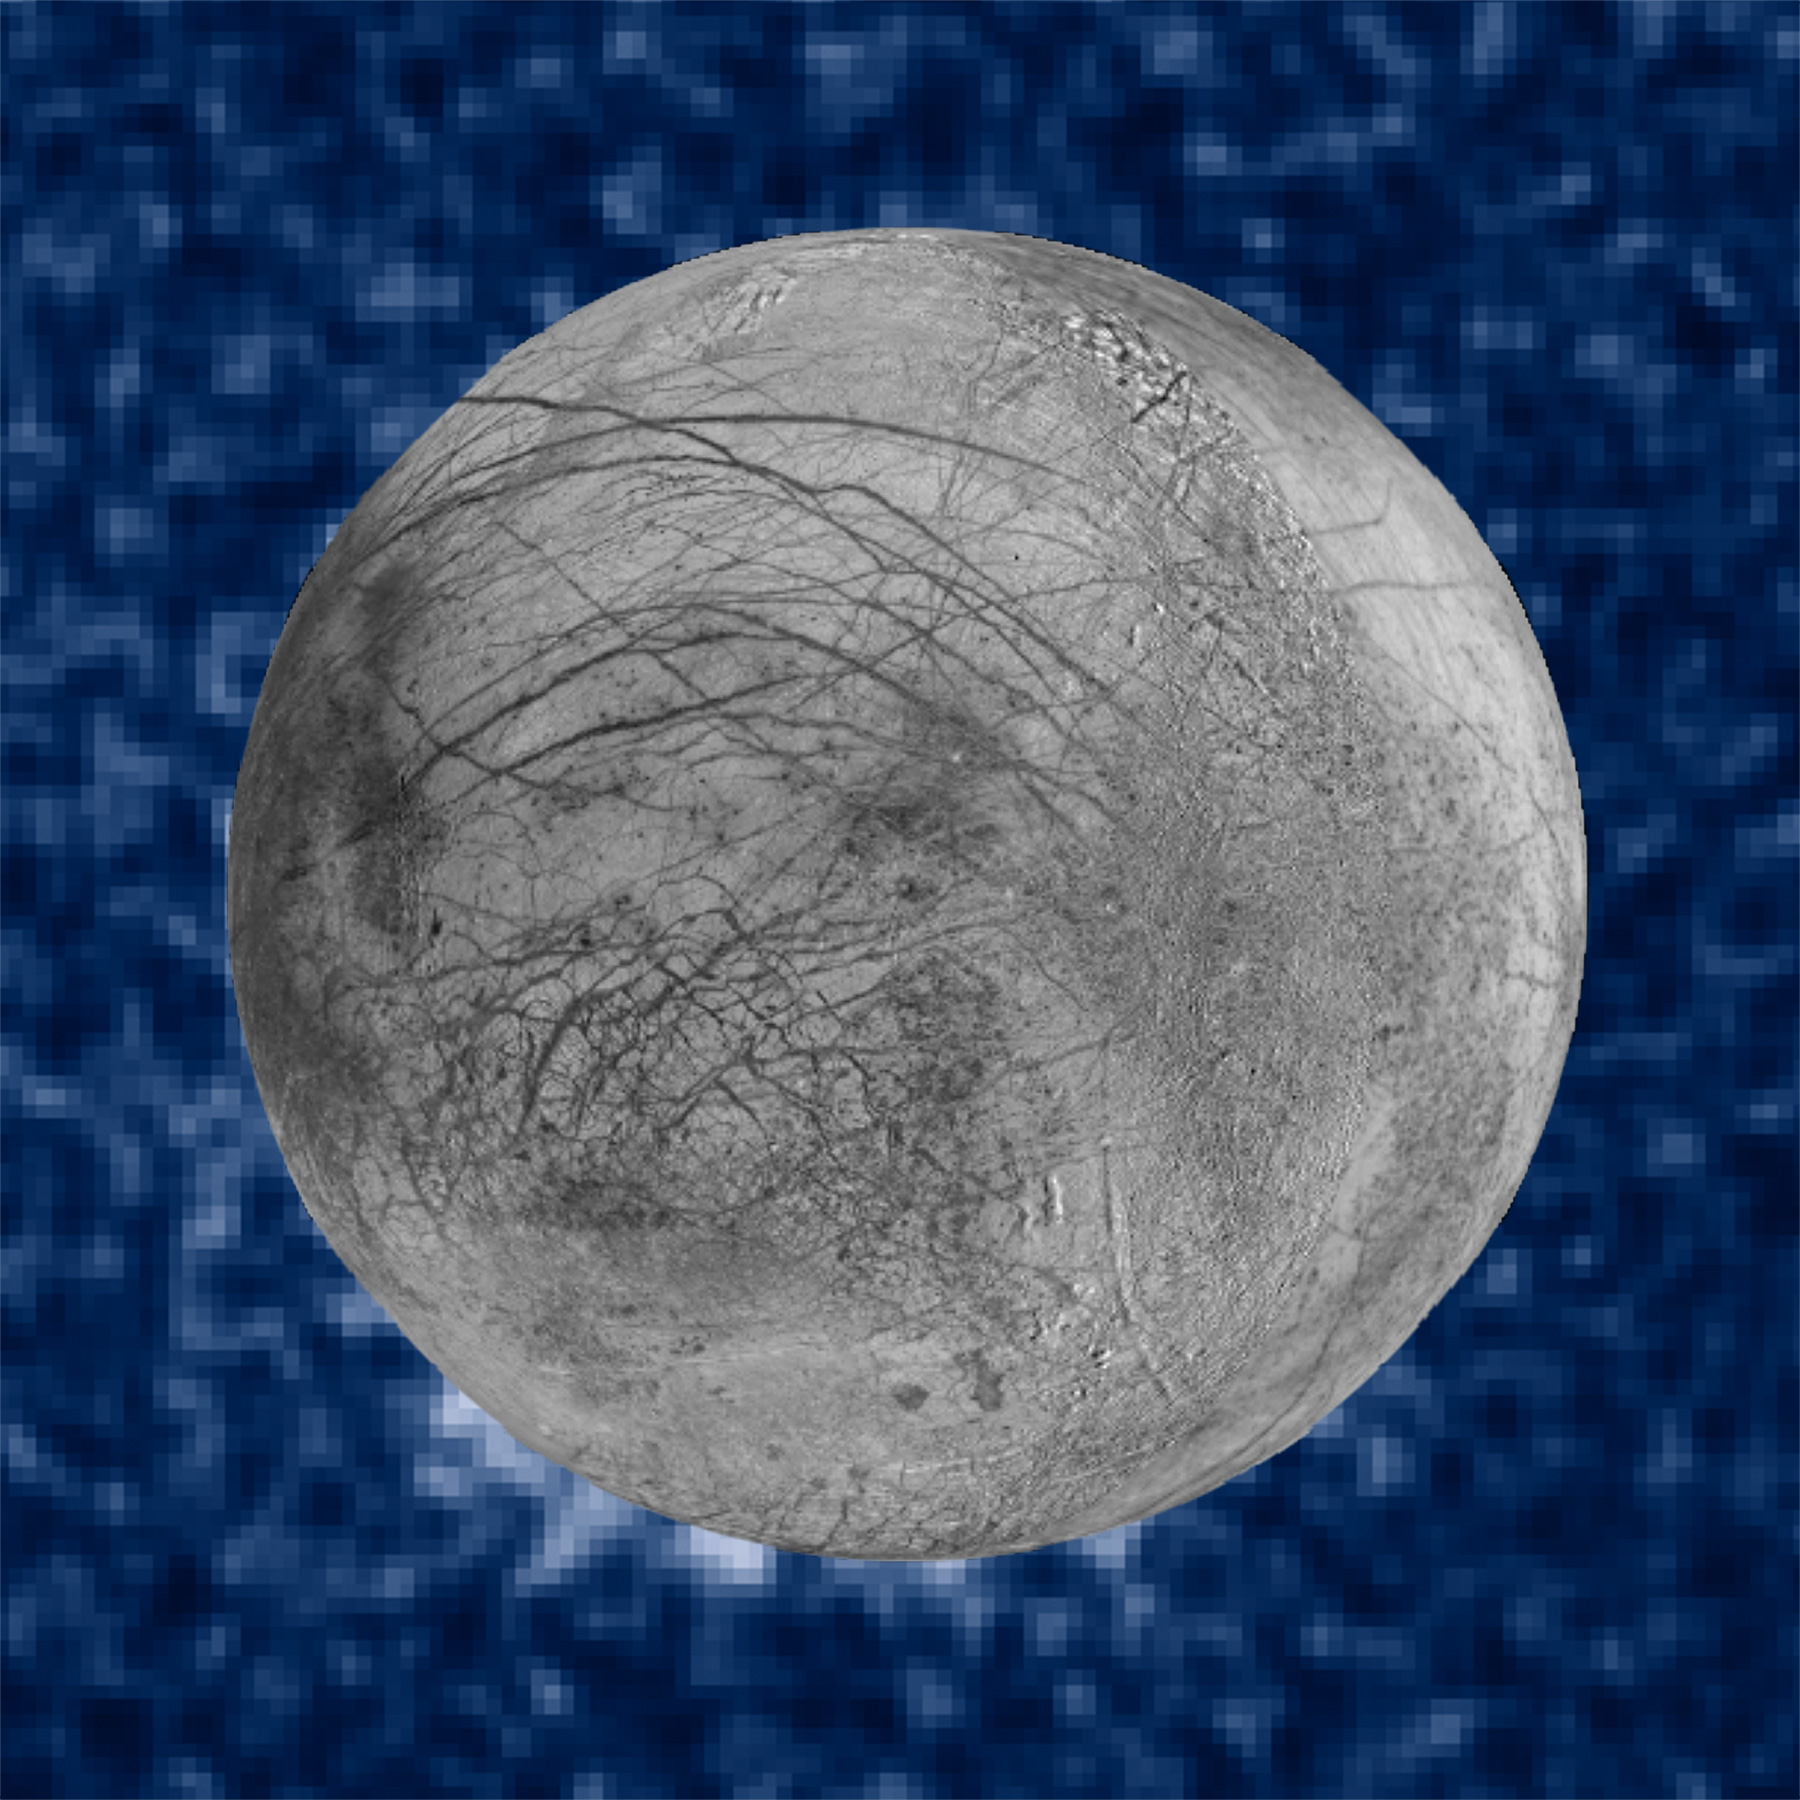 Composite image showing the possible water vapor plumes near the south pole of Europa, at about the 7 o'clock position. The image of Europa, from the Galileo and Voyager missions, is superimposed on the Hubble data. Image Credit: NASA/ESA/W. Sparks (STScI)/USGS Astrogeology Science Center